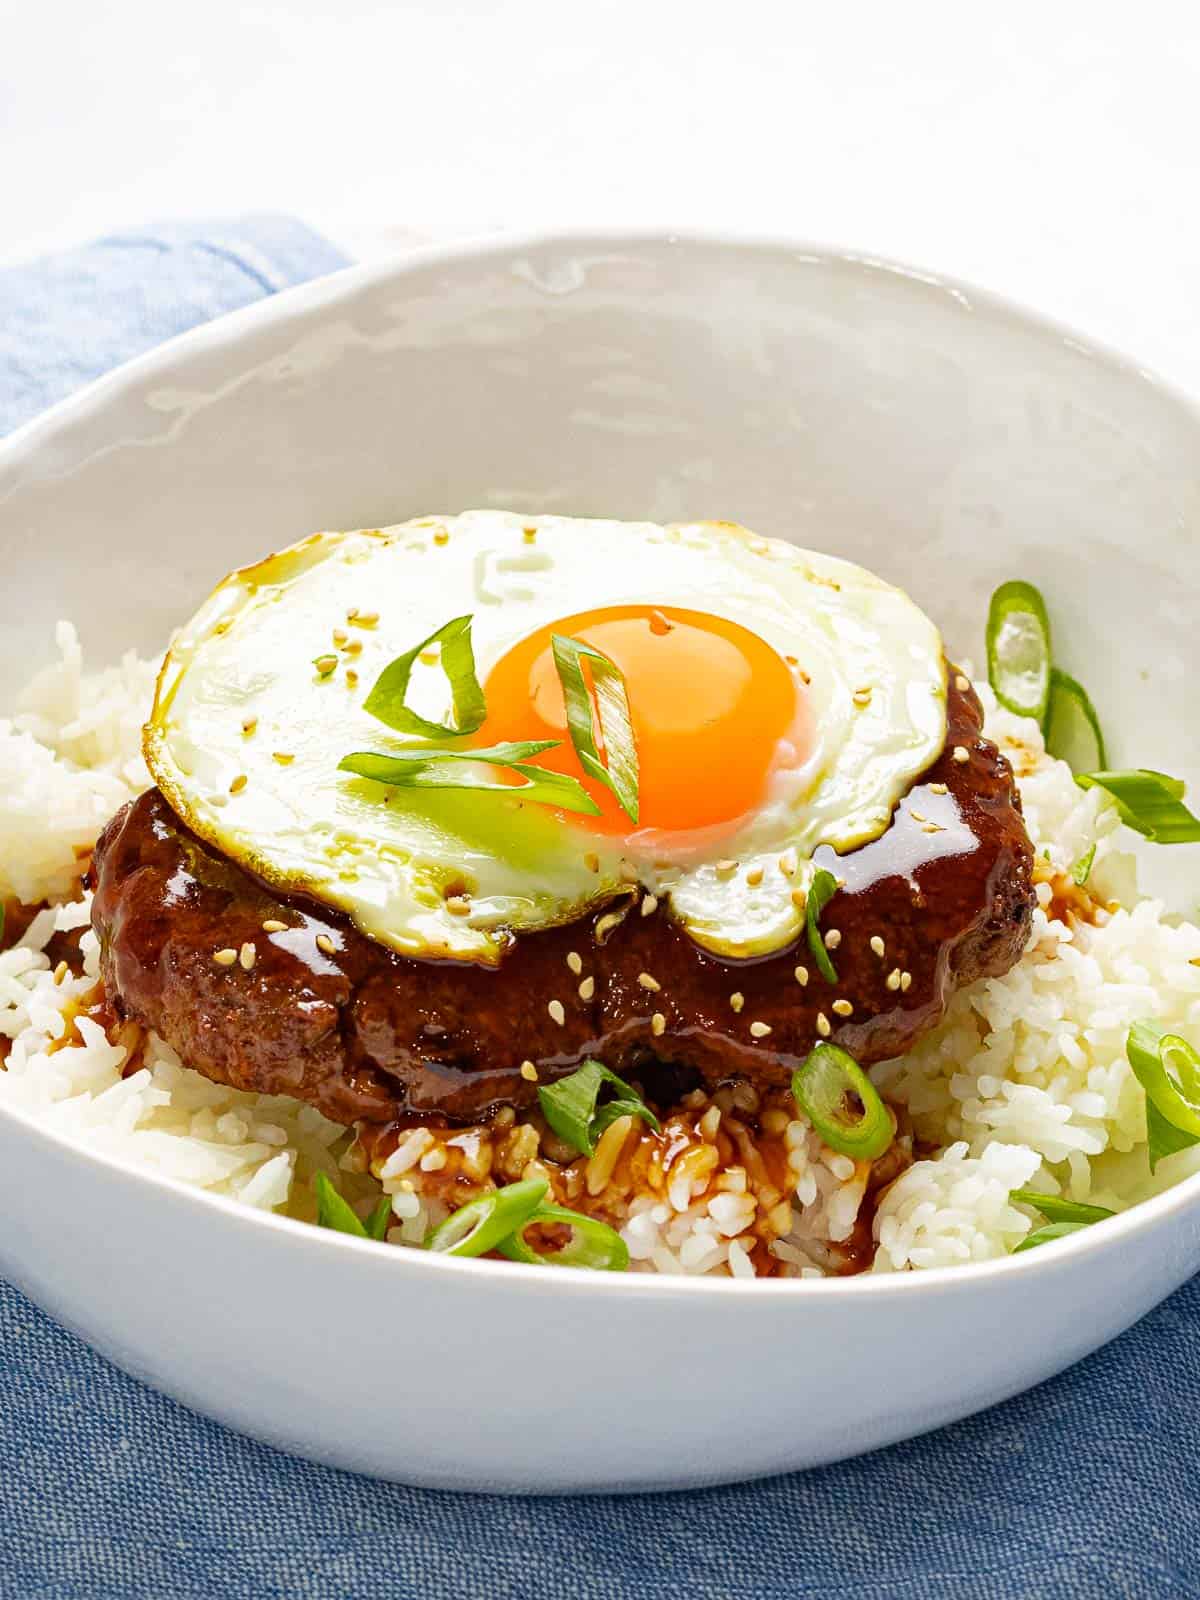 Loco moco made with a juicy burger, savory brown gravy, and a fried egg garnished with green onions.